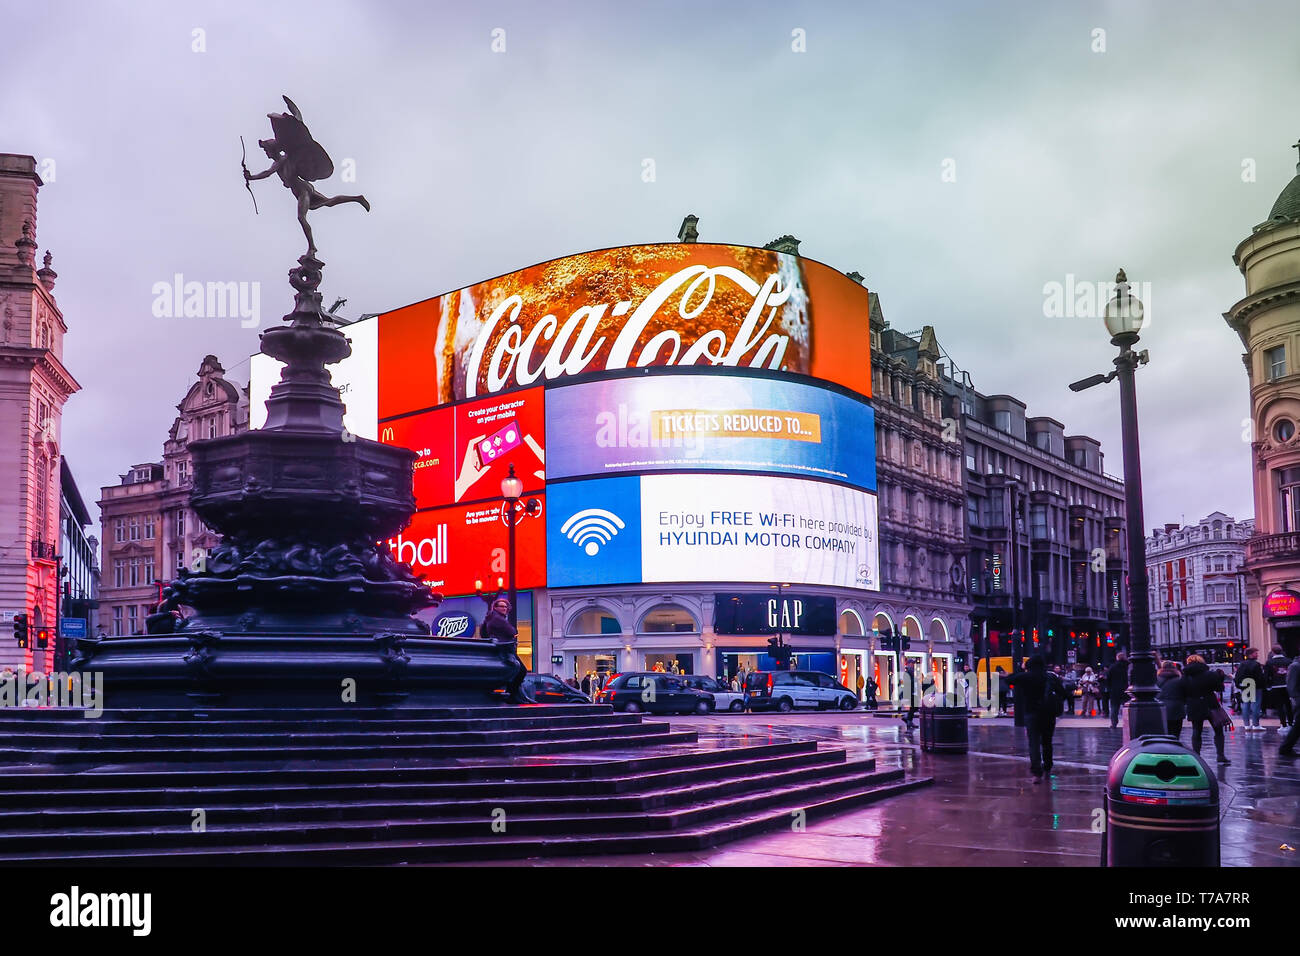 Piccadilly Circus with the Shaftesbury Memorial Fountain and advertising screens, a famous London landmark and busy destination for tourists. Stock Photo